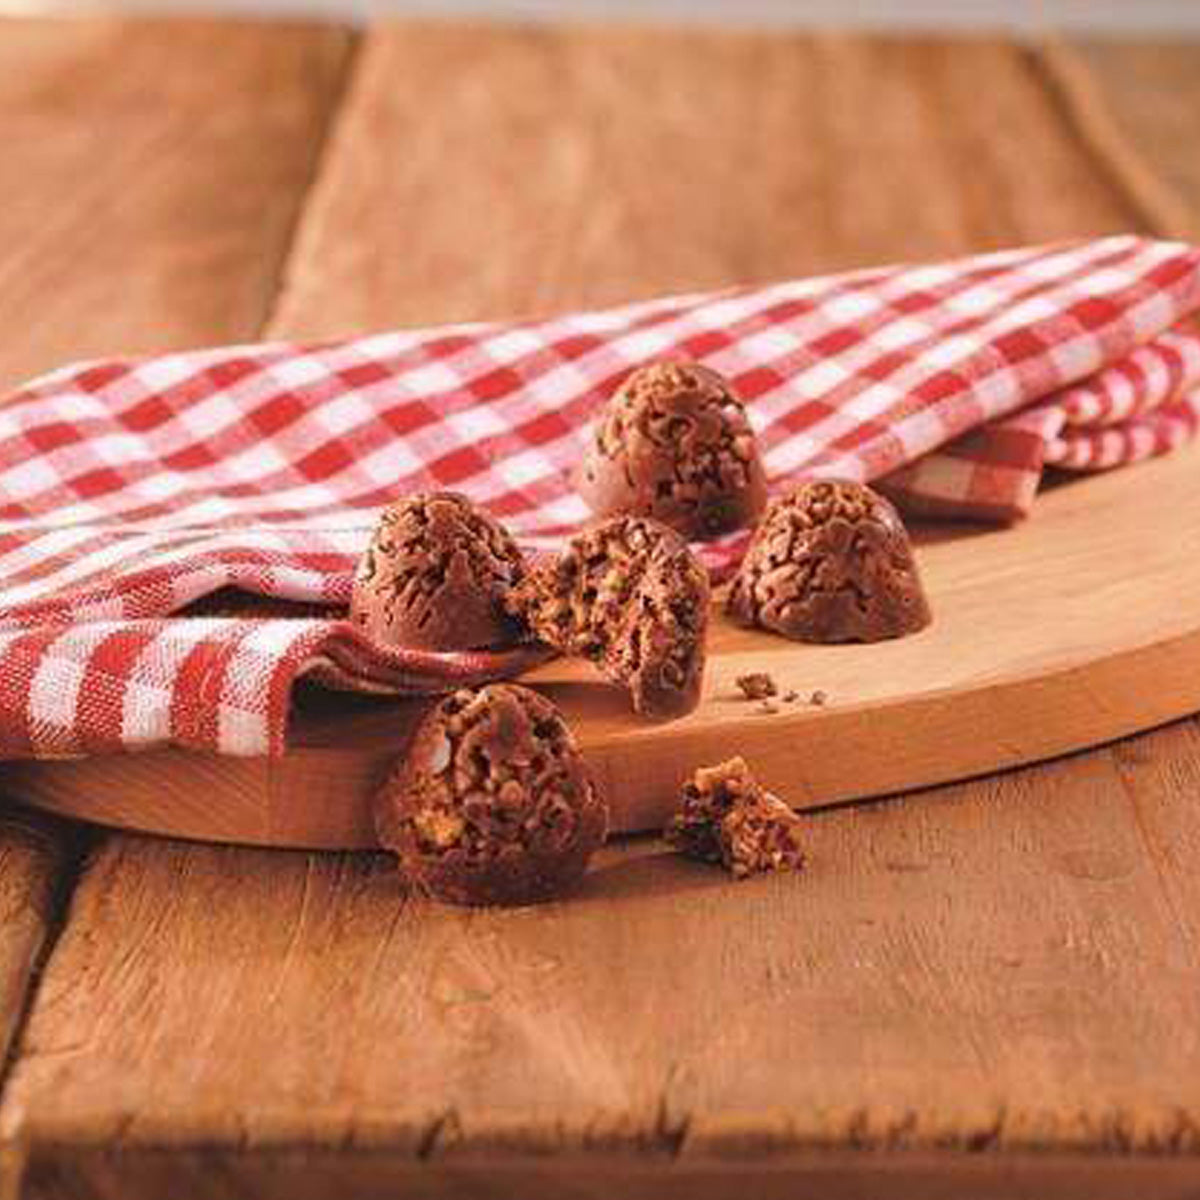 ROYCE' Chocolate - Potechi Crunch Chocolate - Image shows brown chocolate creations filled with crumbled potato chips, cornflakes, and cookie bits inside. Accents include a wooden chopping board and a tablecloth with red and white checkers. Background is brown wood.